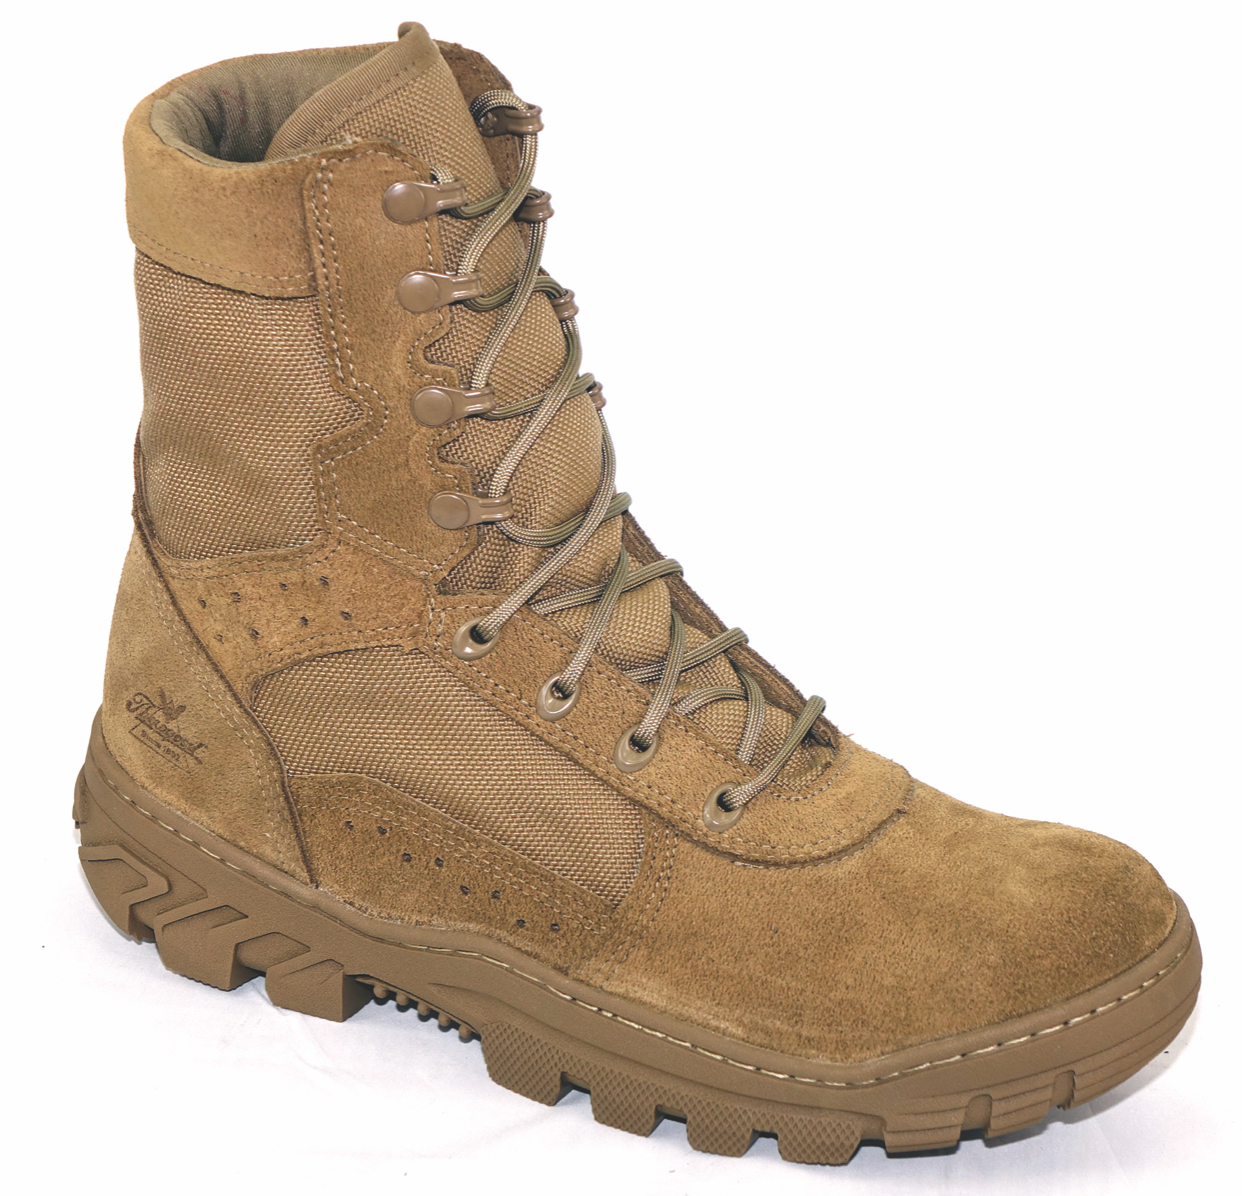 Thorogood War Fighter Boot Review 